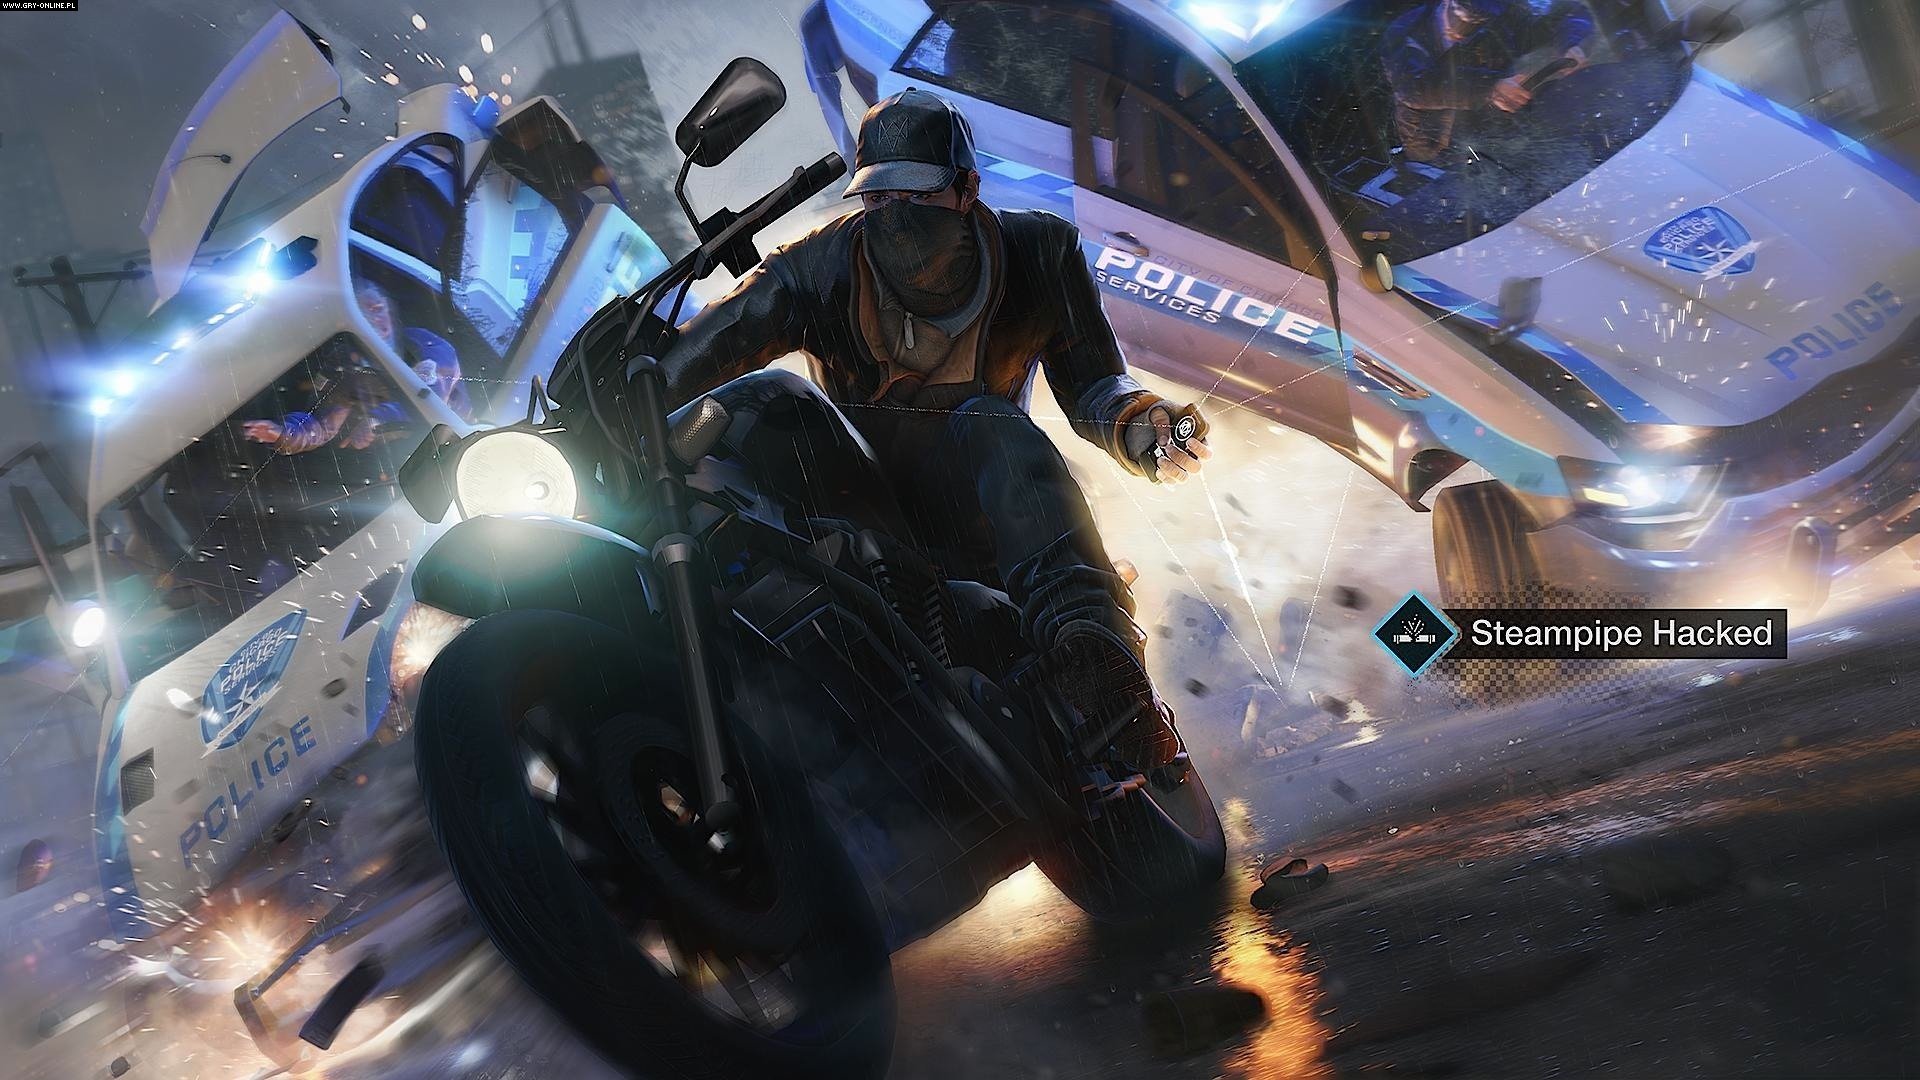 Free Watch Dogs high quality wallpaper ID:117257 for full hd 1920x1080 desktop